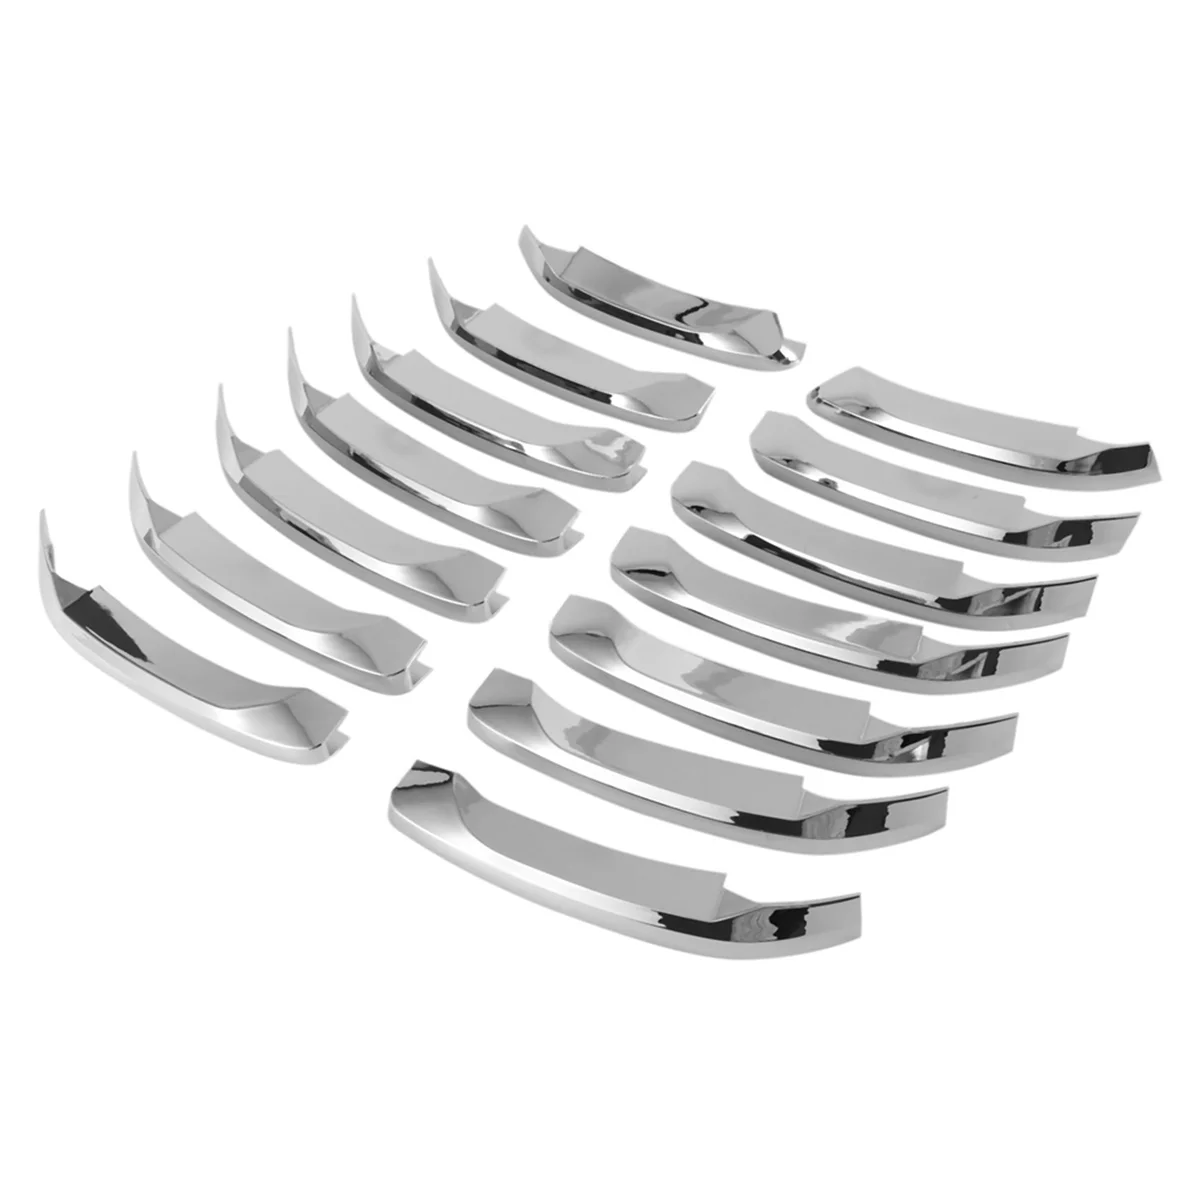 

14Pcs Car Chrome Front Grill Decoration Strips Cover Trim for BMW X1 F48 2016-2019 Accessories